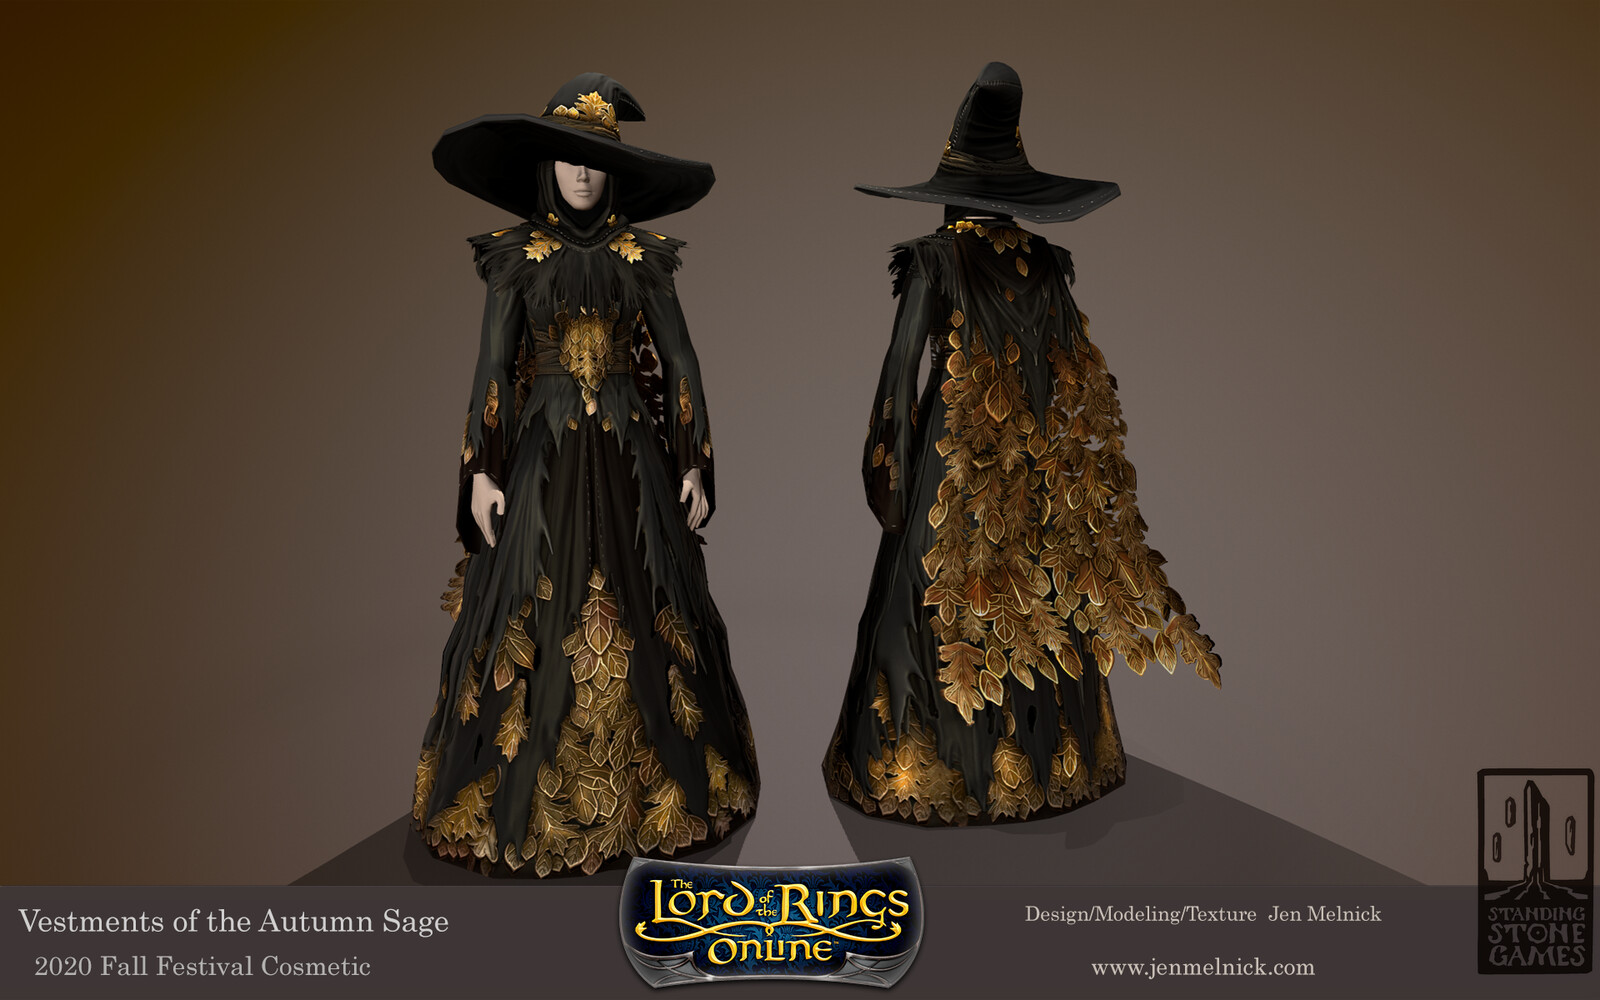 Lord of the Rings Online
Vestments of the Autumn Sage
Fall Festival 2020
Dress, Shoulders, Hat, and Cloak are all dyeable
